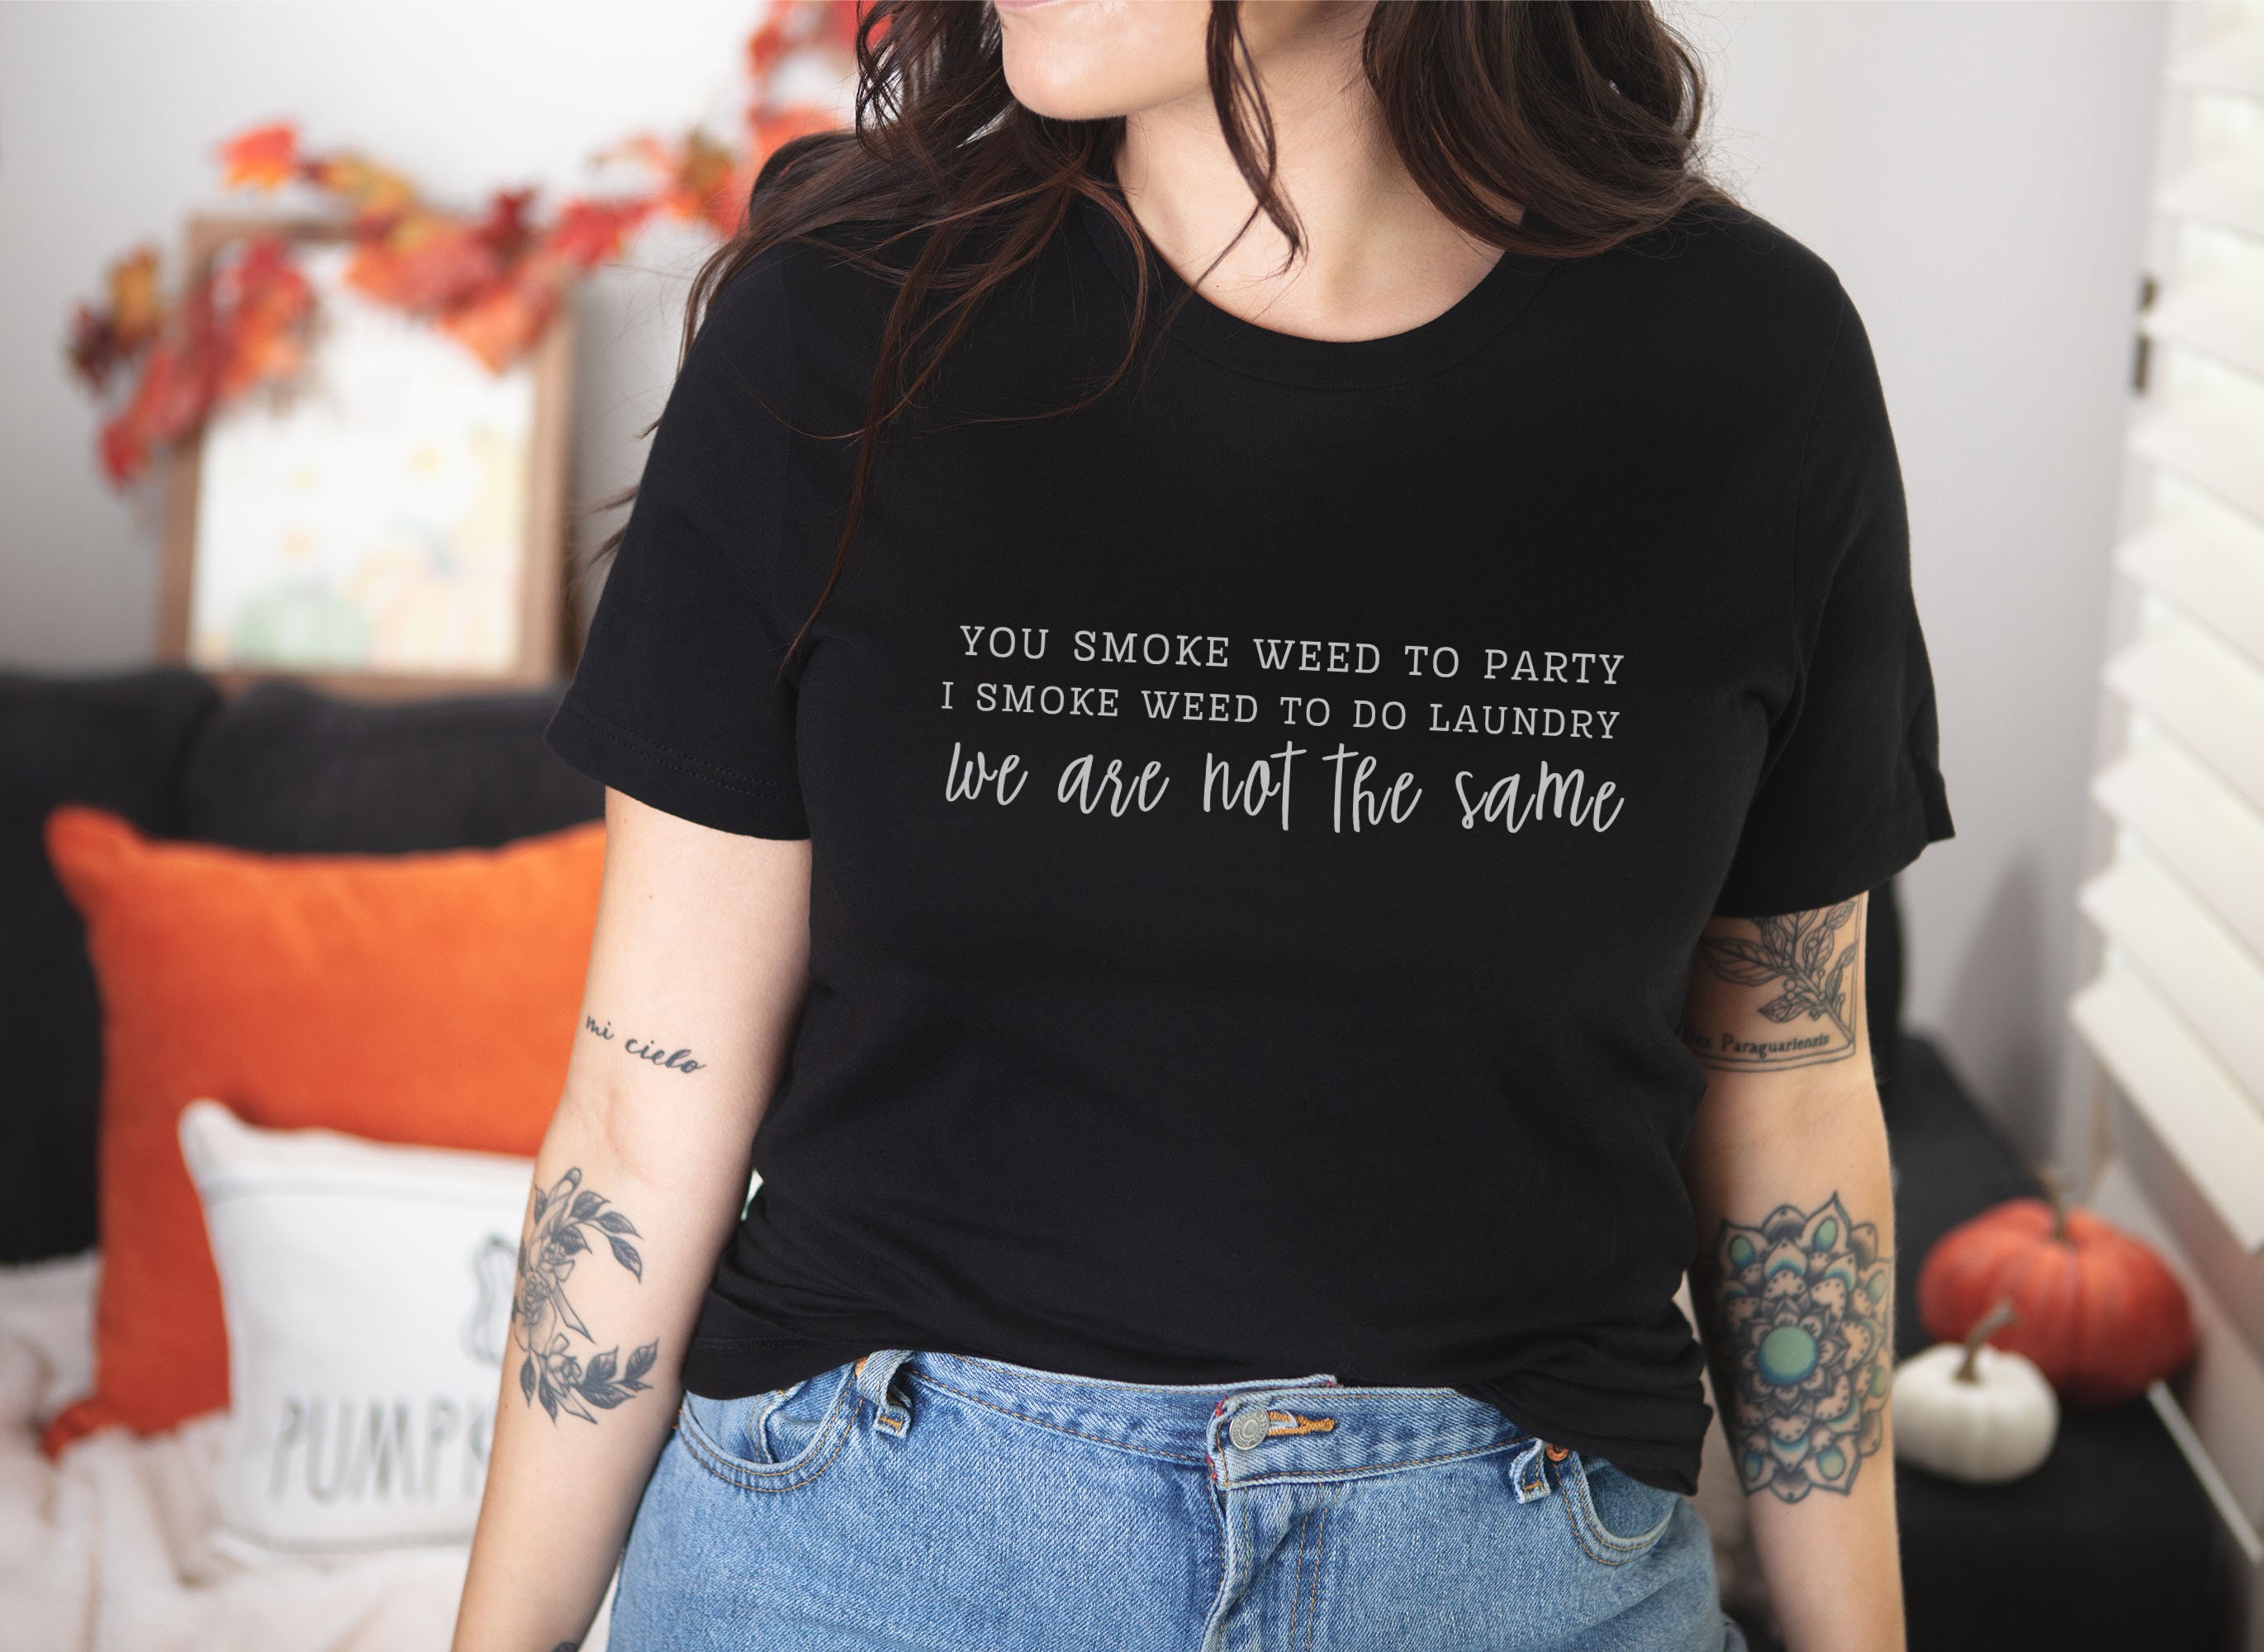 We Are Not the Same Stoner T-shirt Cute Cannabis Shirt - Etsy